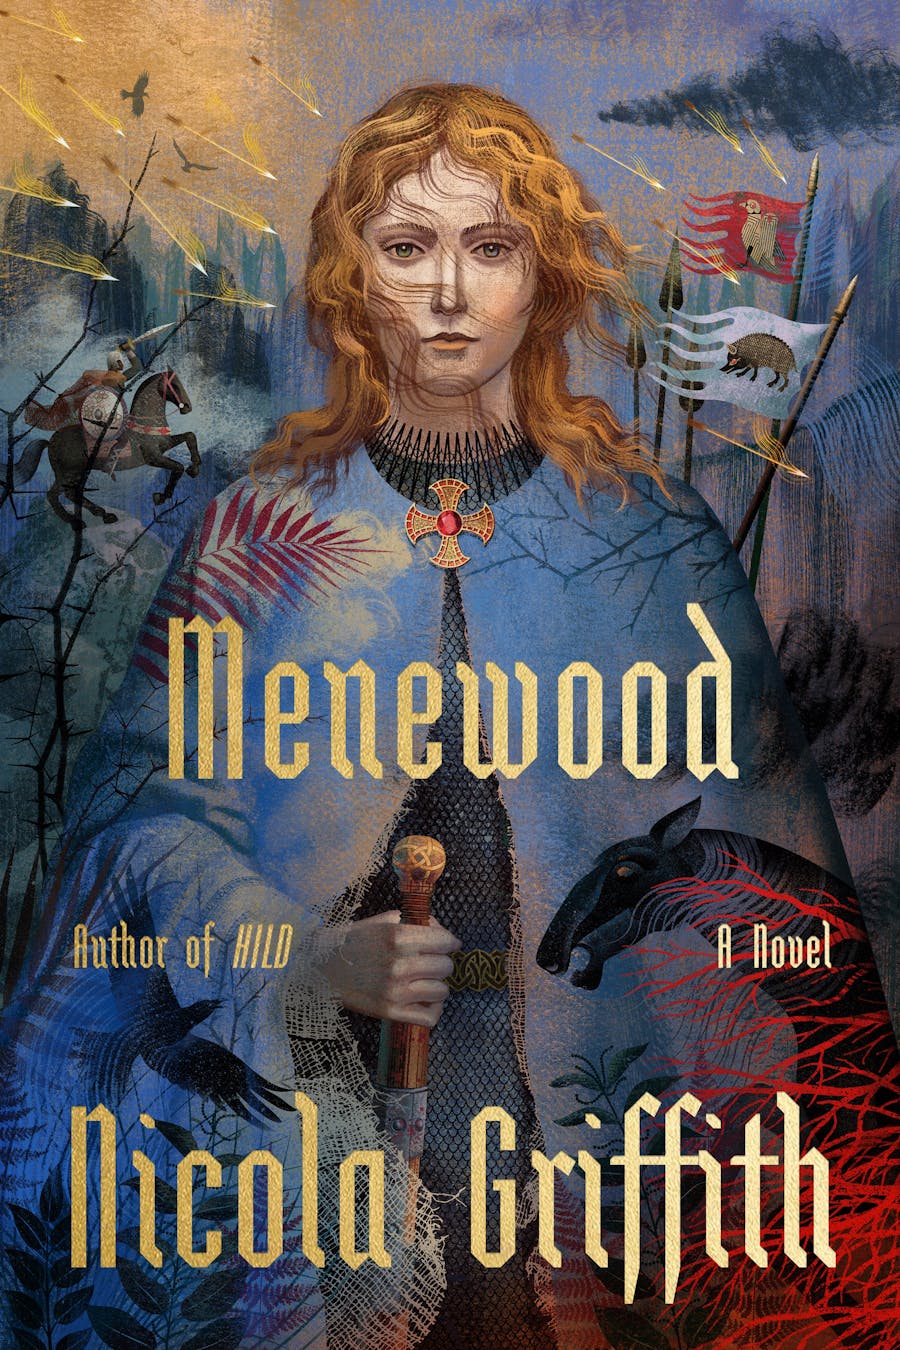 Cover of Menewood, a novel by Nicola Griffith, showing Hild.